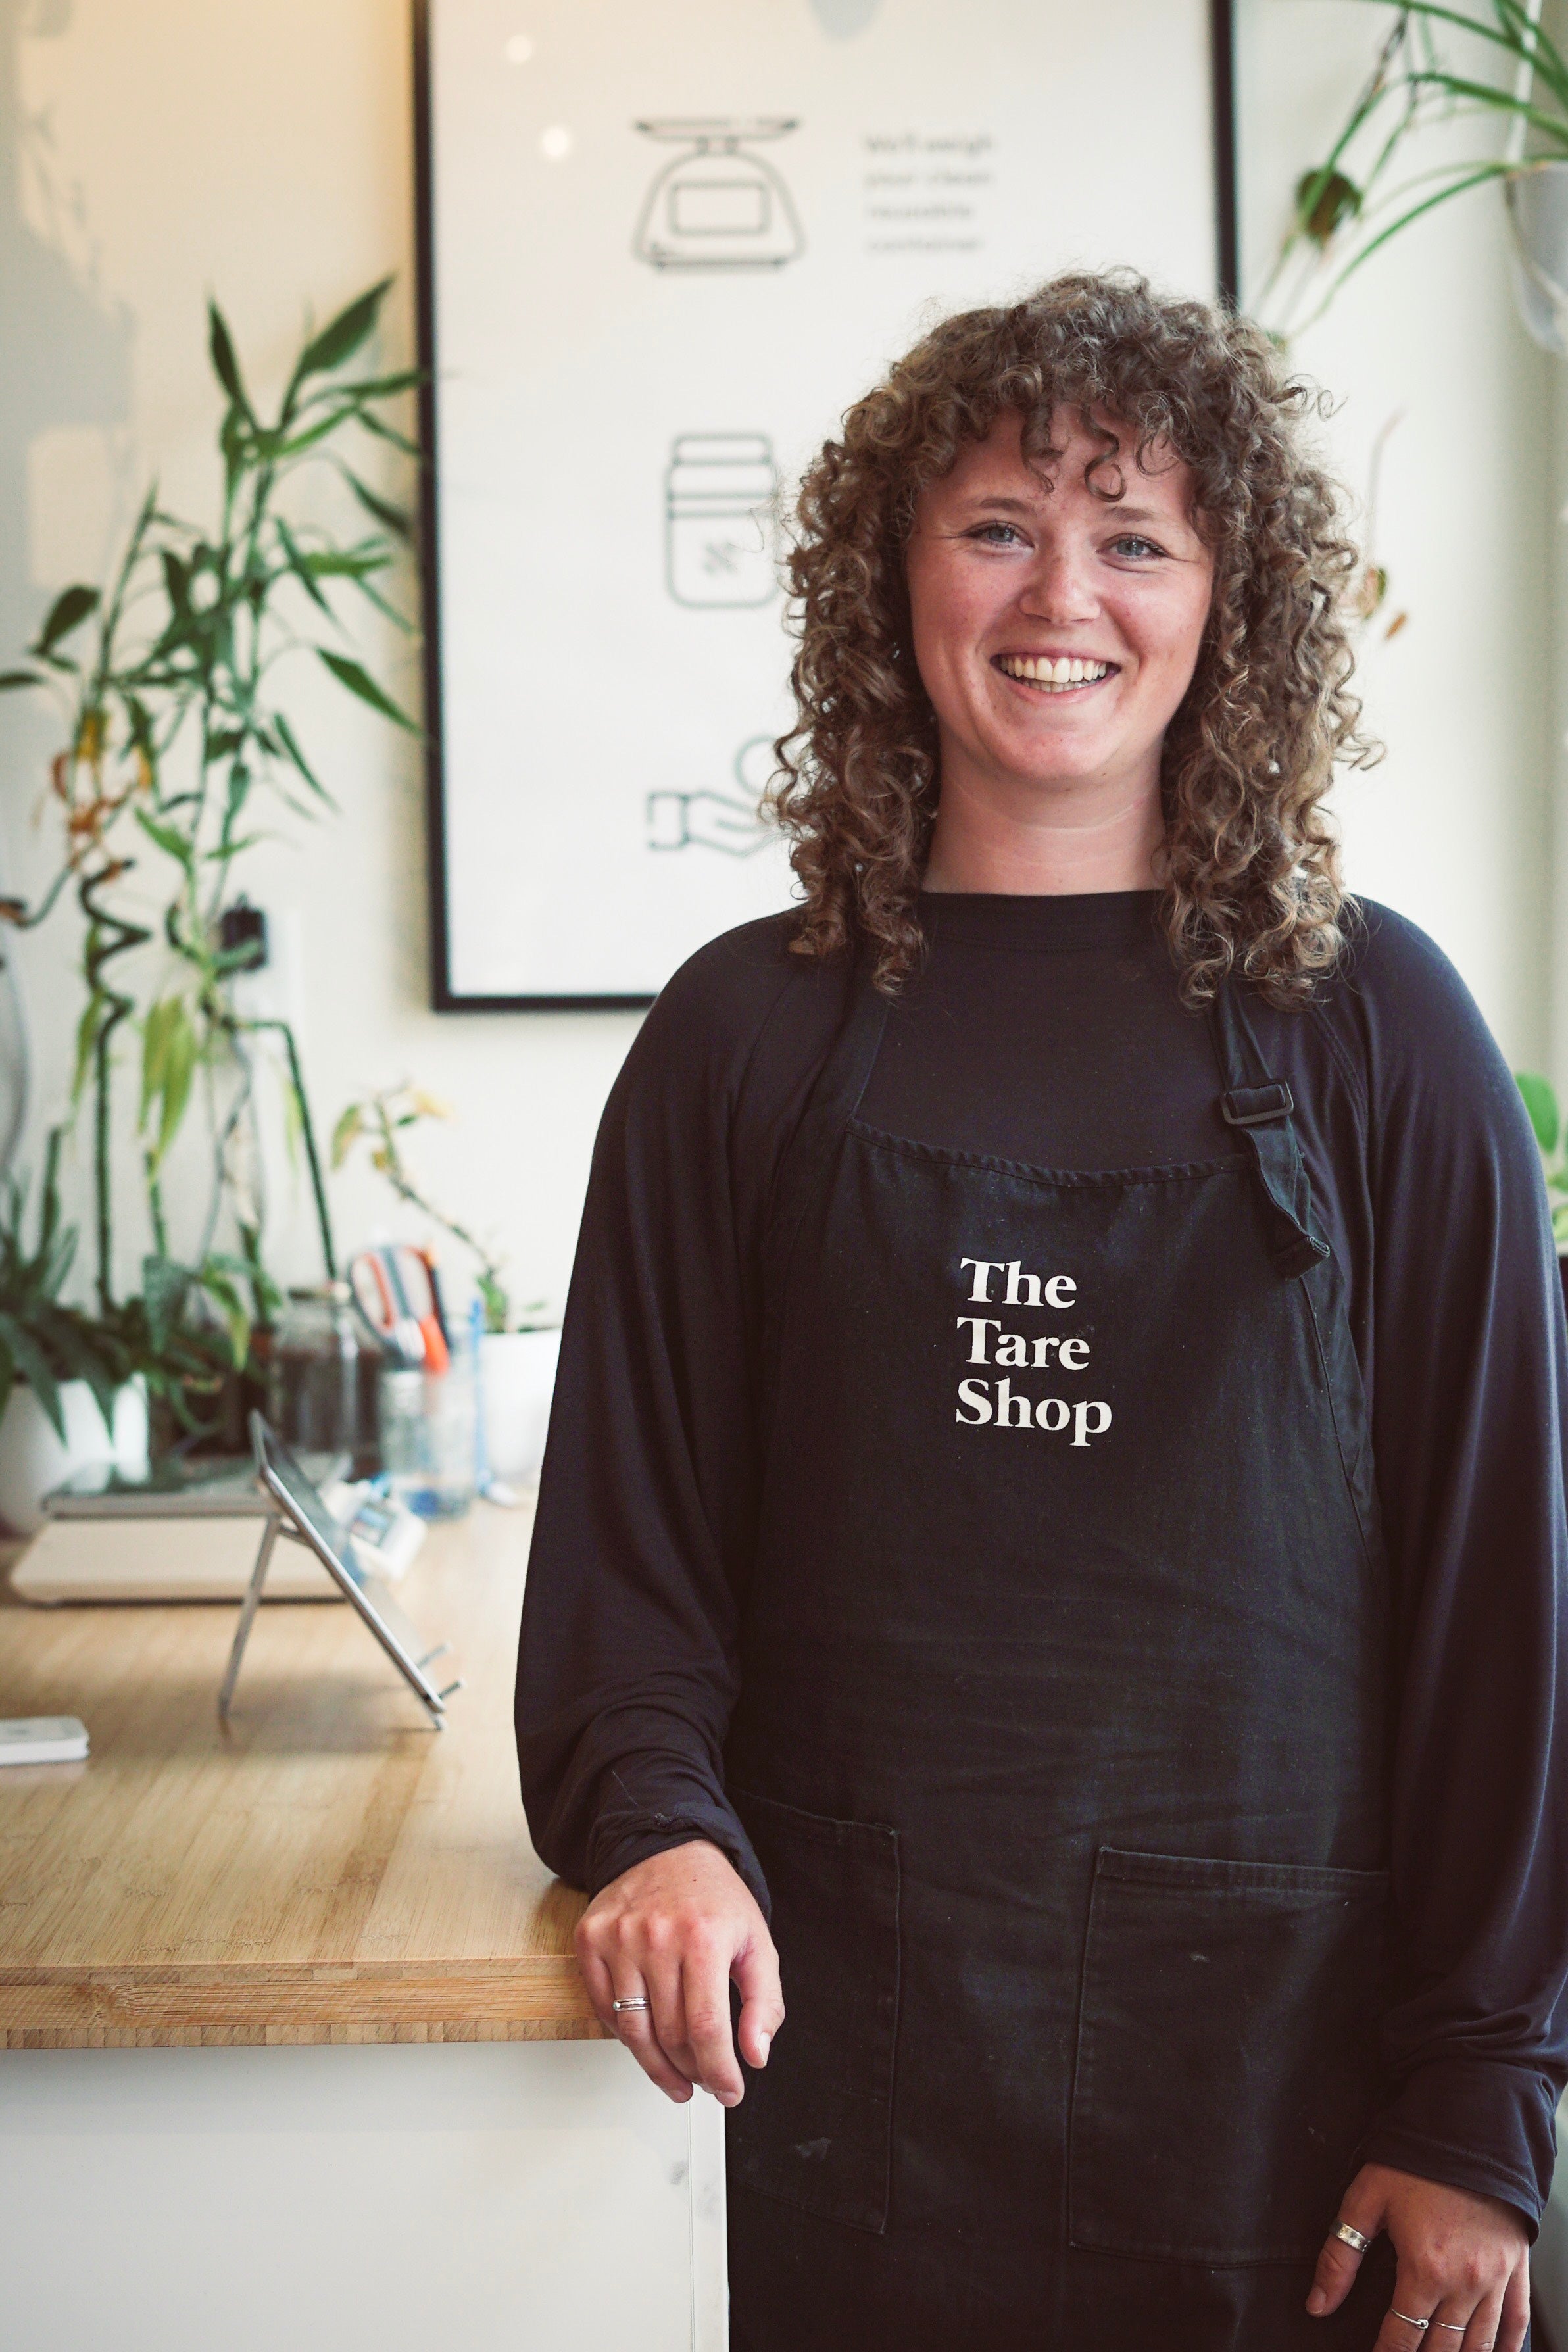 Kate Pepler smiling to the camera wearing a Tare Shop apron.